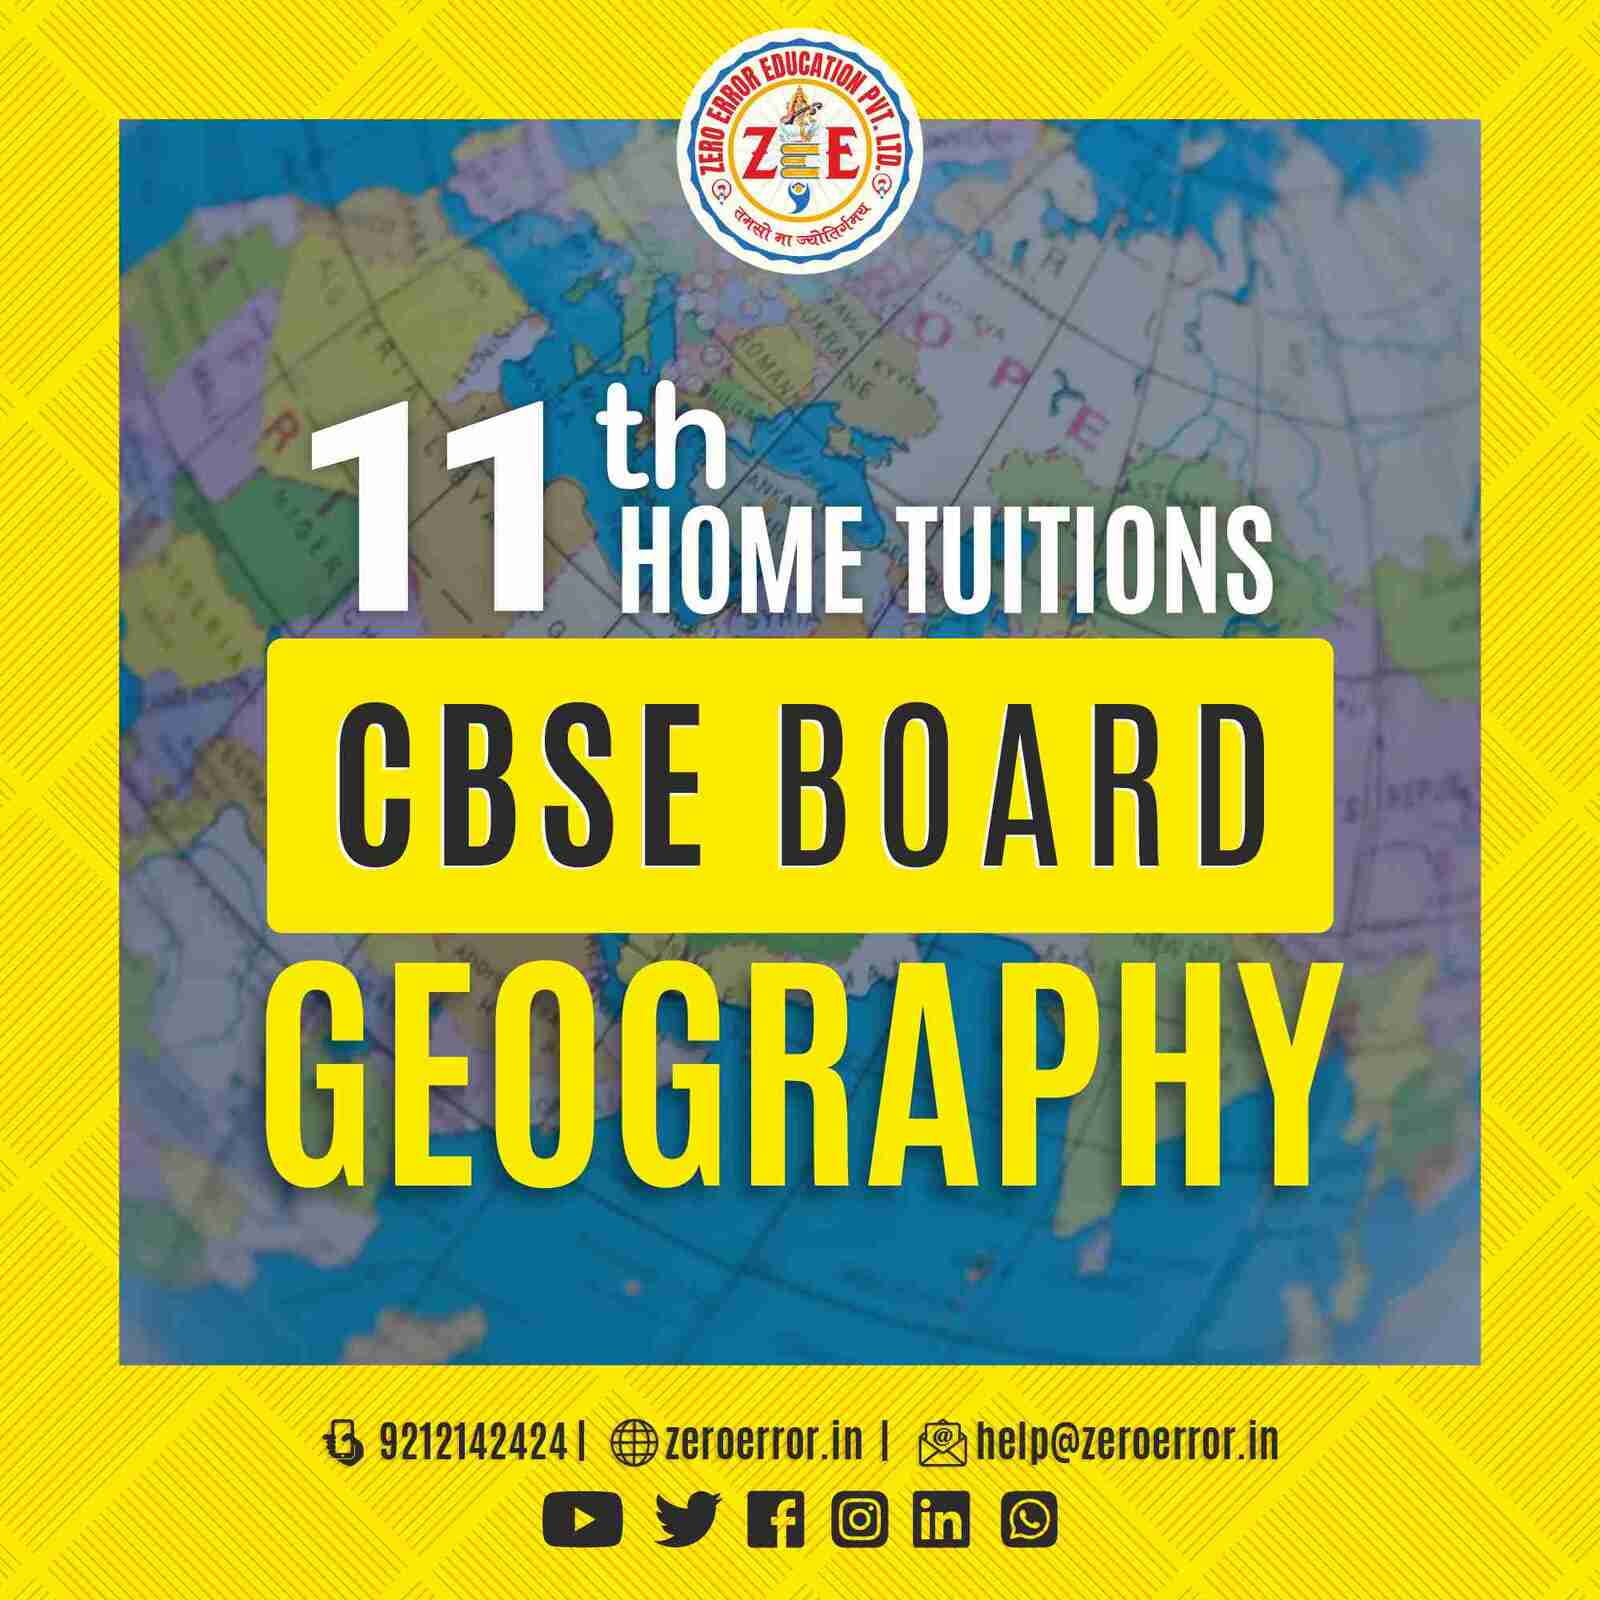 11th Grade CBSE Geography Online Classes by Zero Error Education Prepare for your CBSE board exams with online and offline Geography classes for 11th grade. Learn from experienced home tutors and get all the help you need to succeed. Enroll today at Zero Error Education. [https://zeroerror.in/] Call 9212142424 for more information.